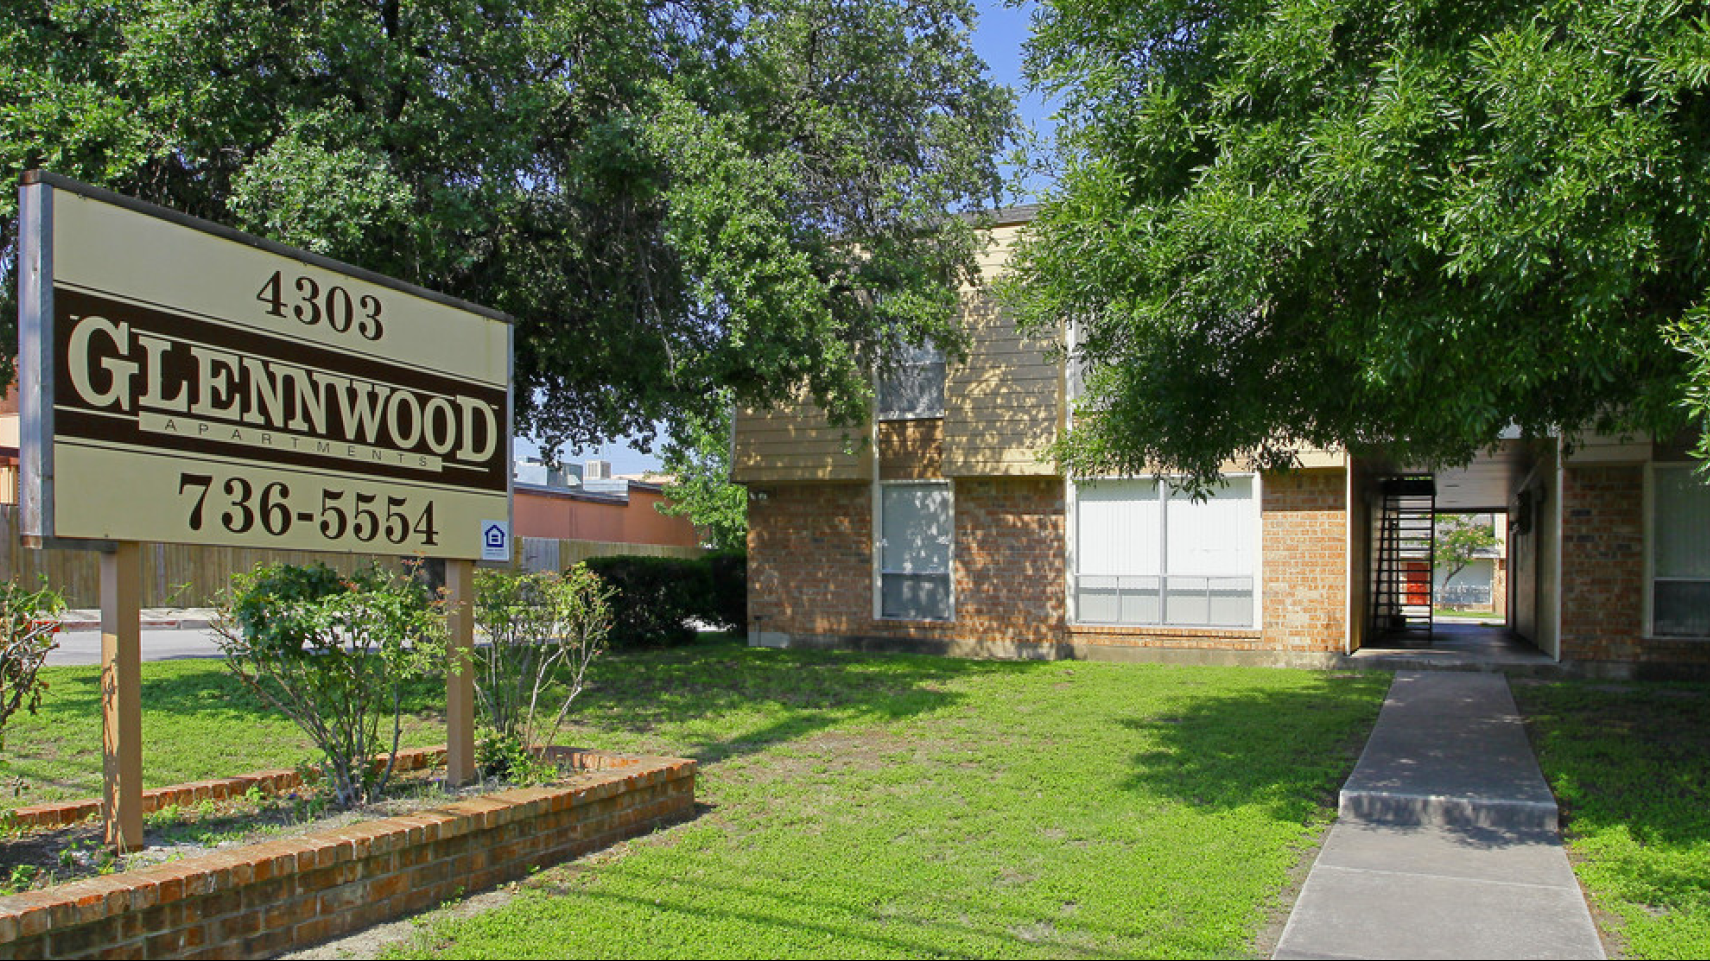 Exterior view of Glennwood apartments with signage and buildings.